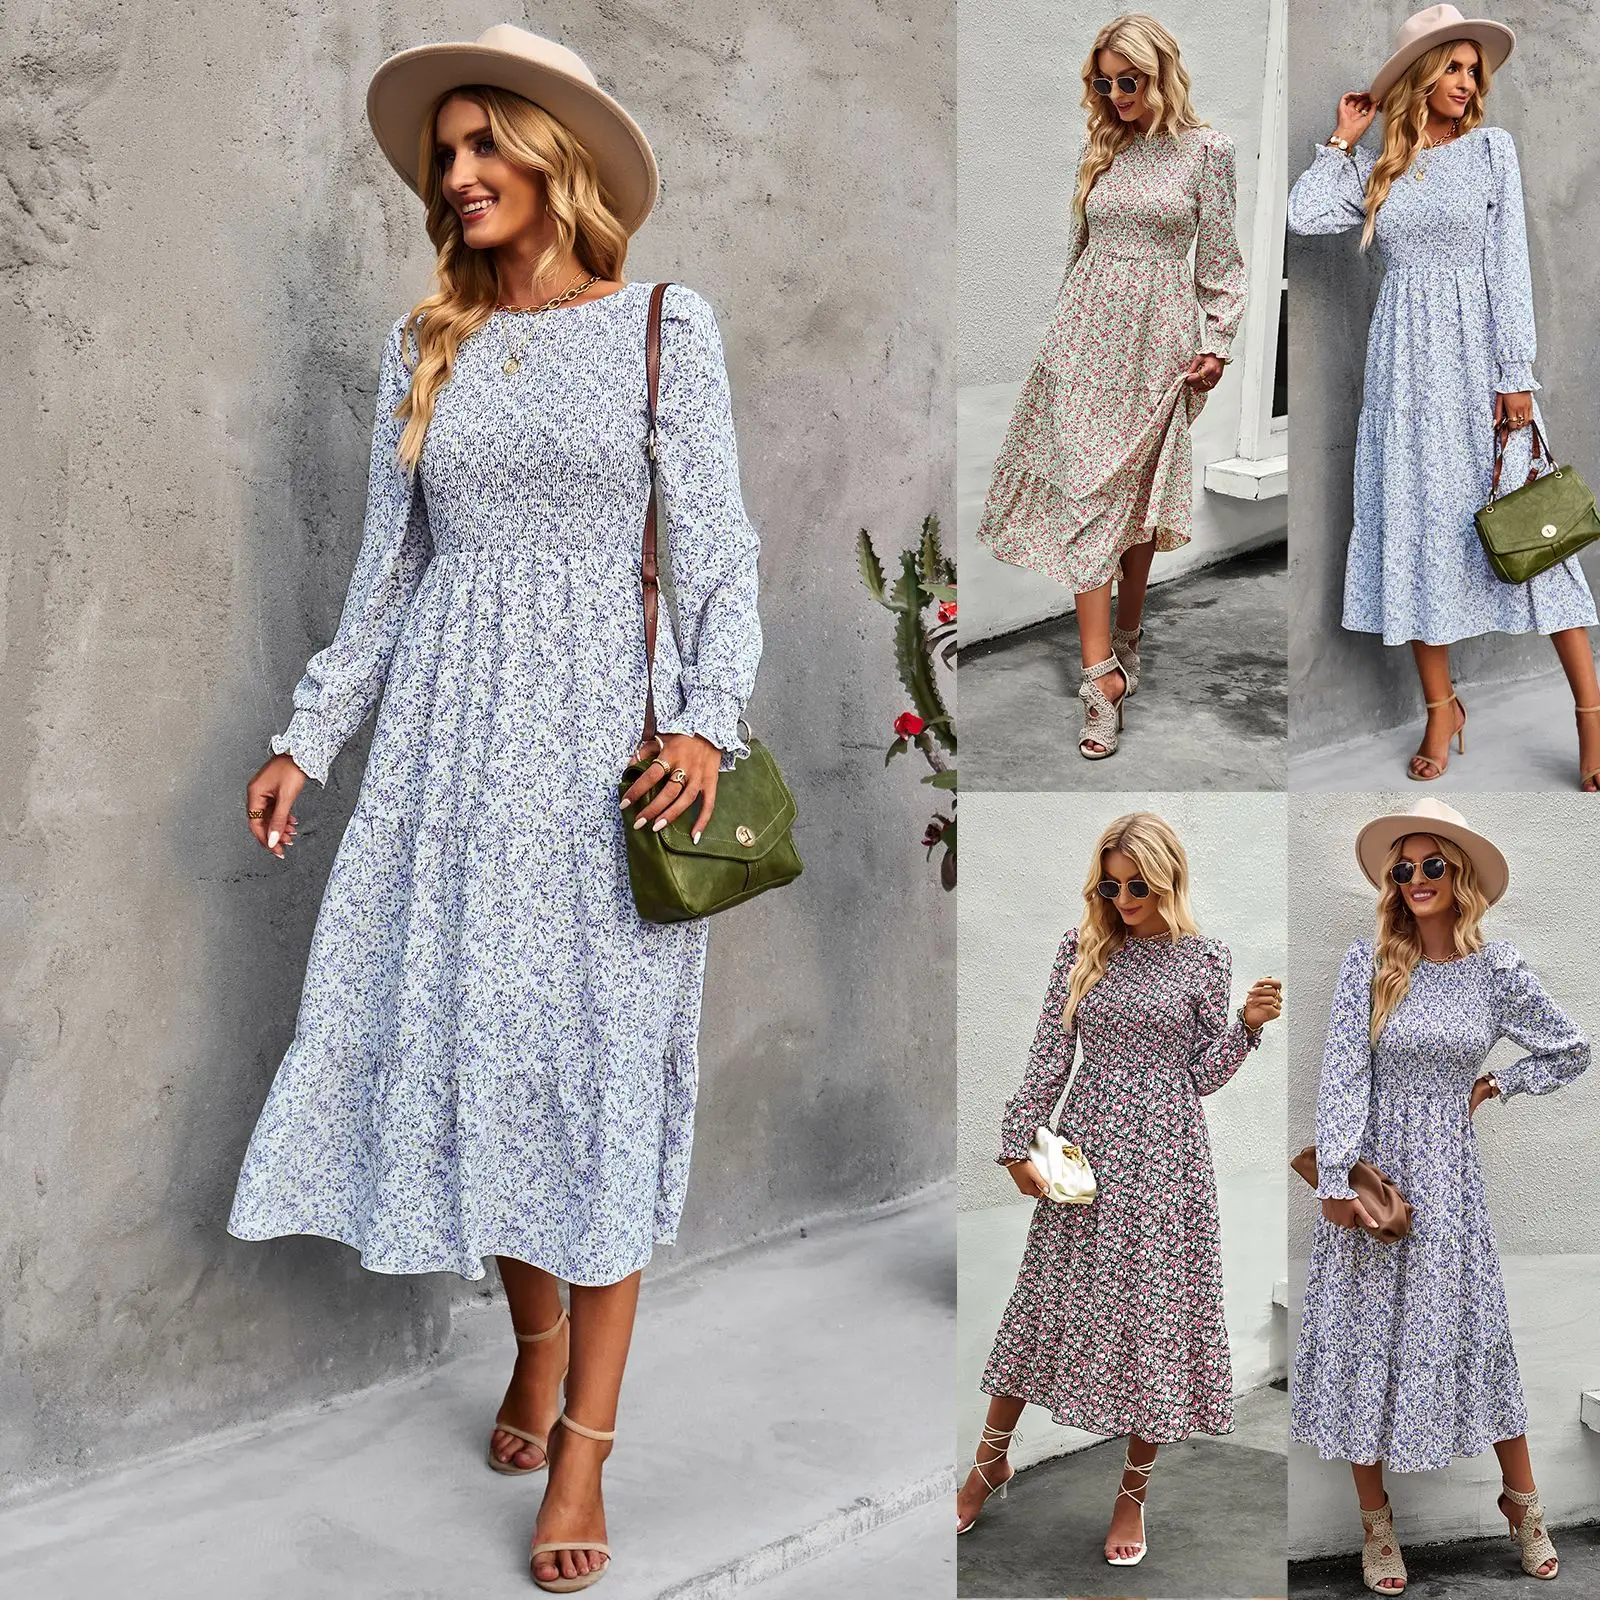 

Independent research and design of floral long skirt four seasons long sleeve leisure temperament holiday dress.